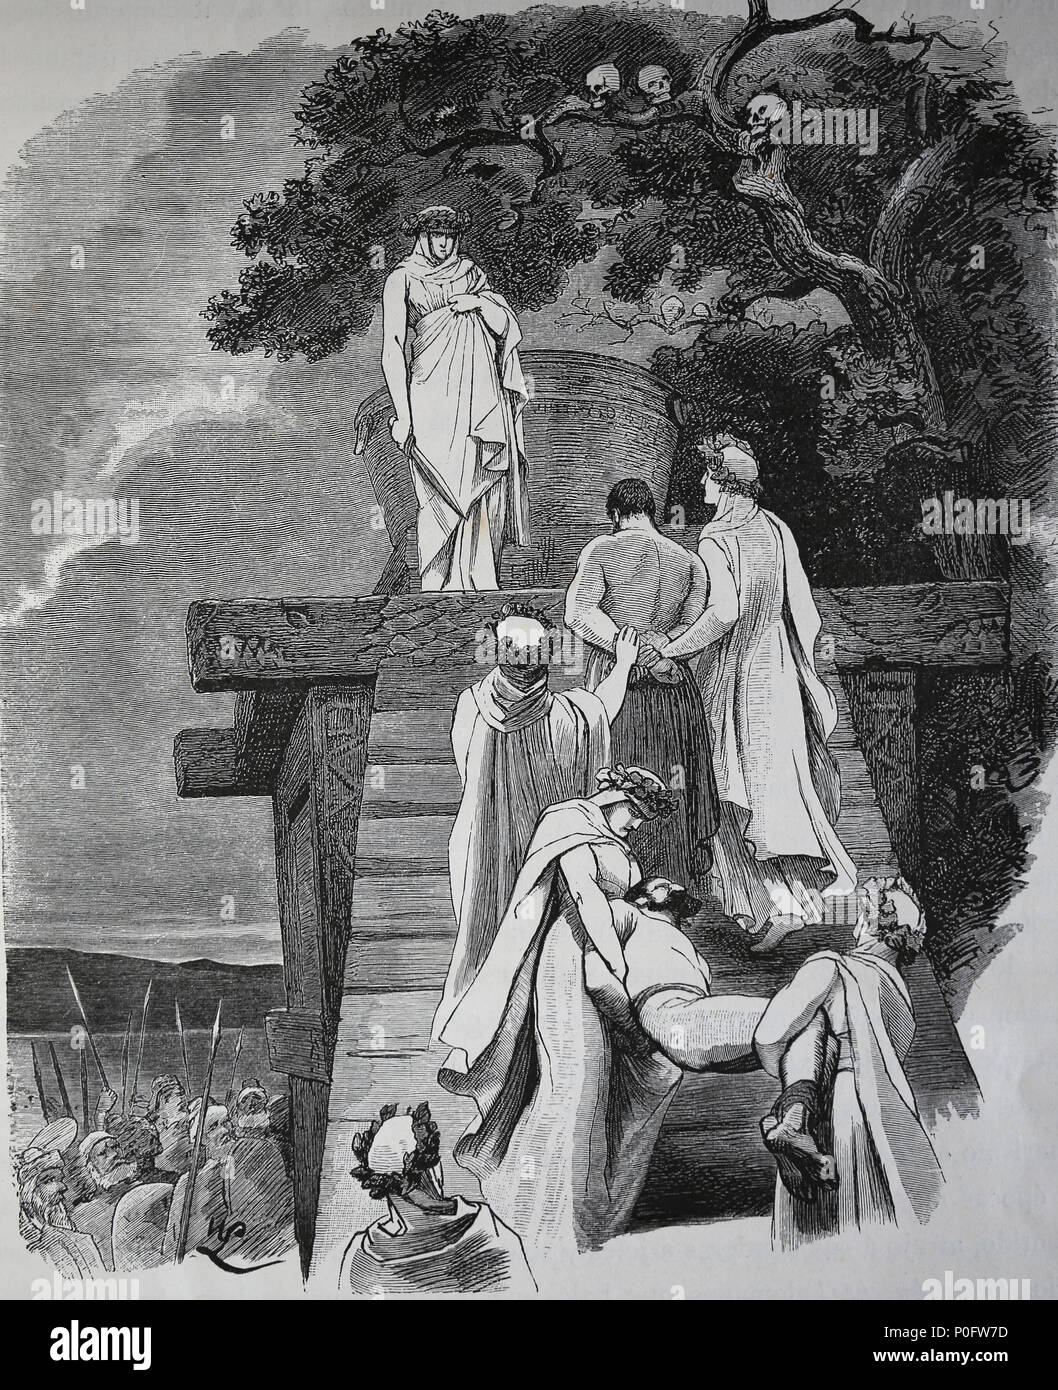 Human sacrifice in ancient Germany. Engraving, 1882 of 'Germania'. Stock Photo